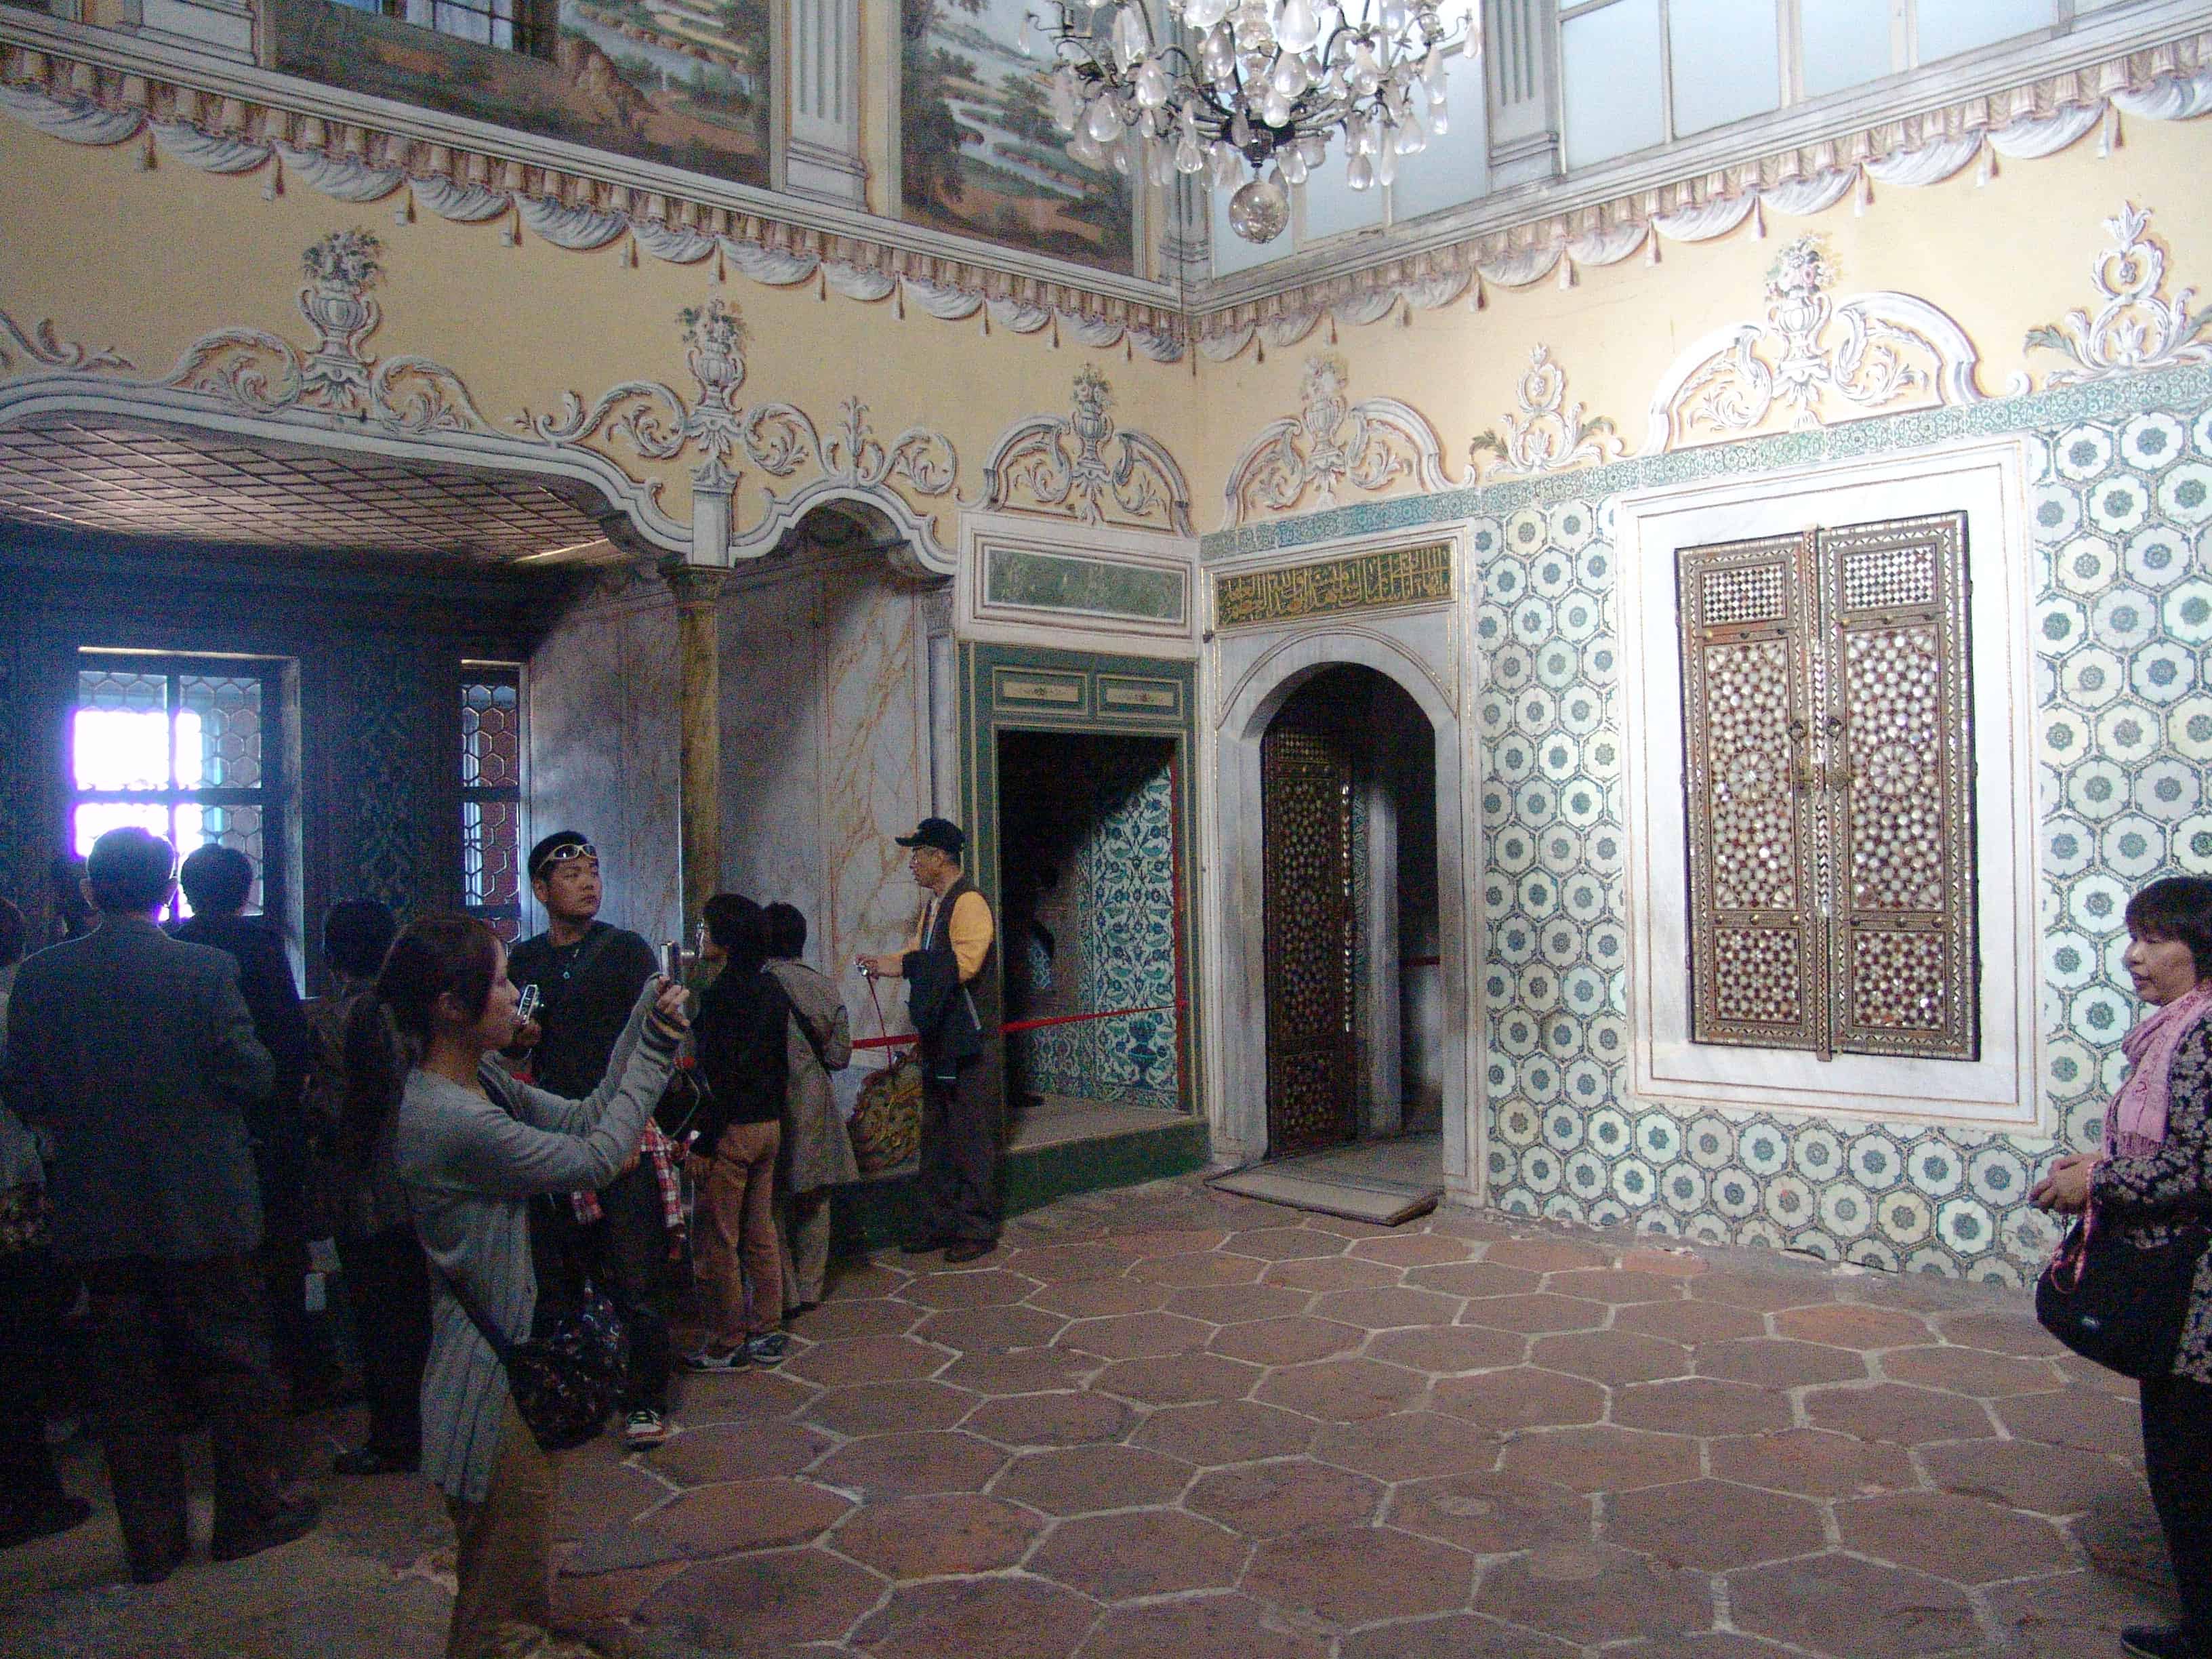 Apartments of the Queen Mother in the Imperial Harem at Topkapi Palace in Istanbul, Turkey